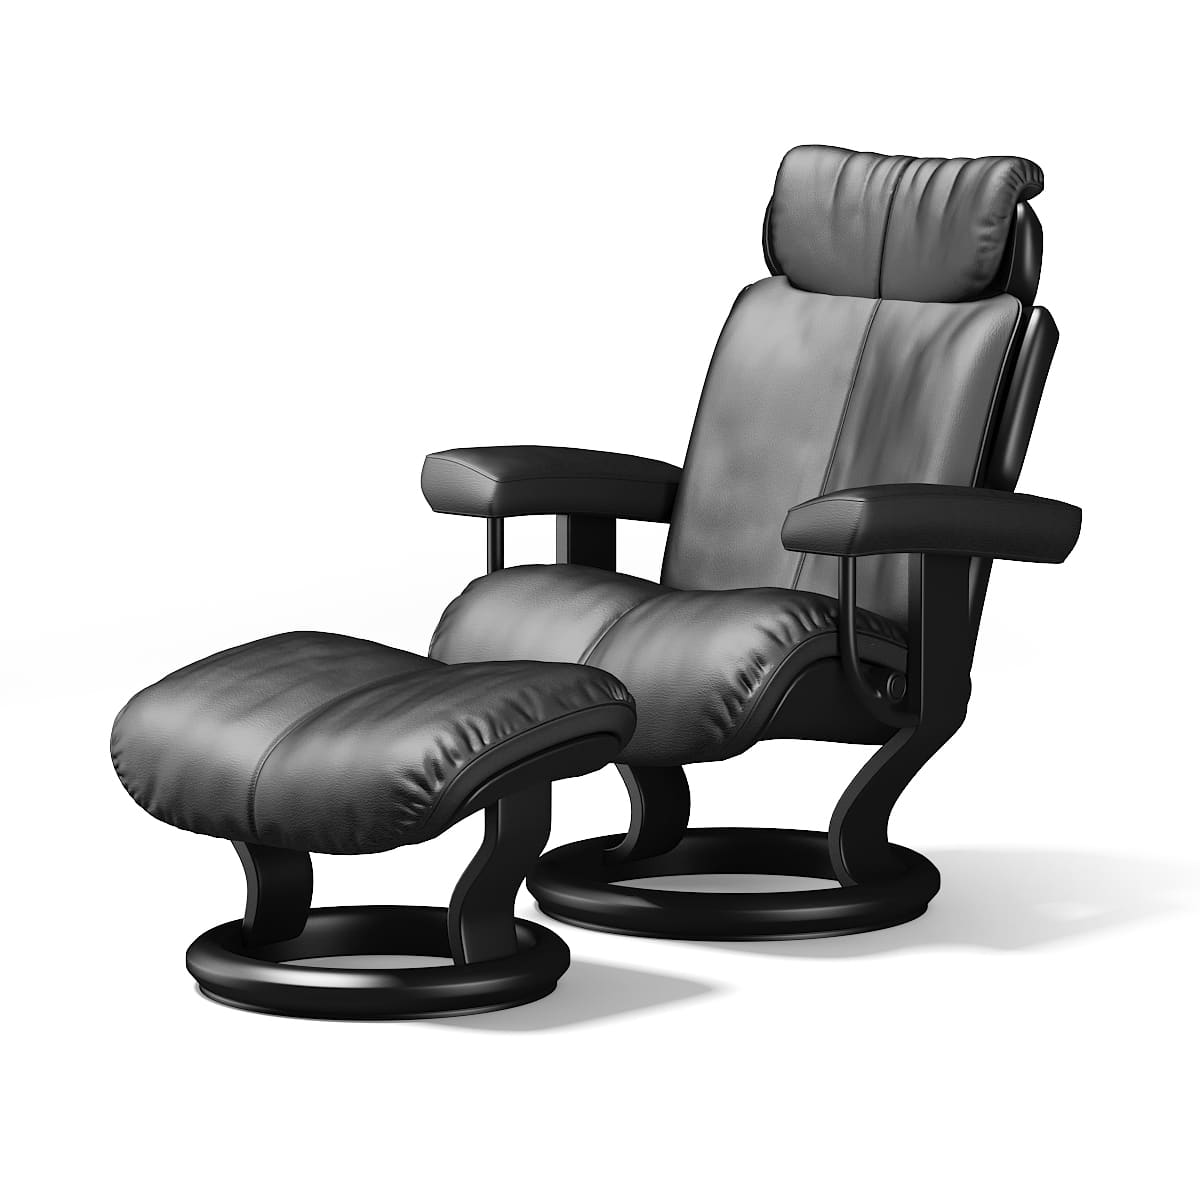 Black Leather Chair With Footrest, Leather Chair Black